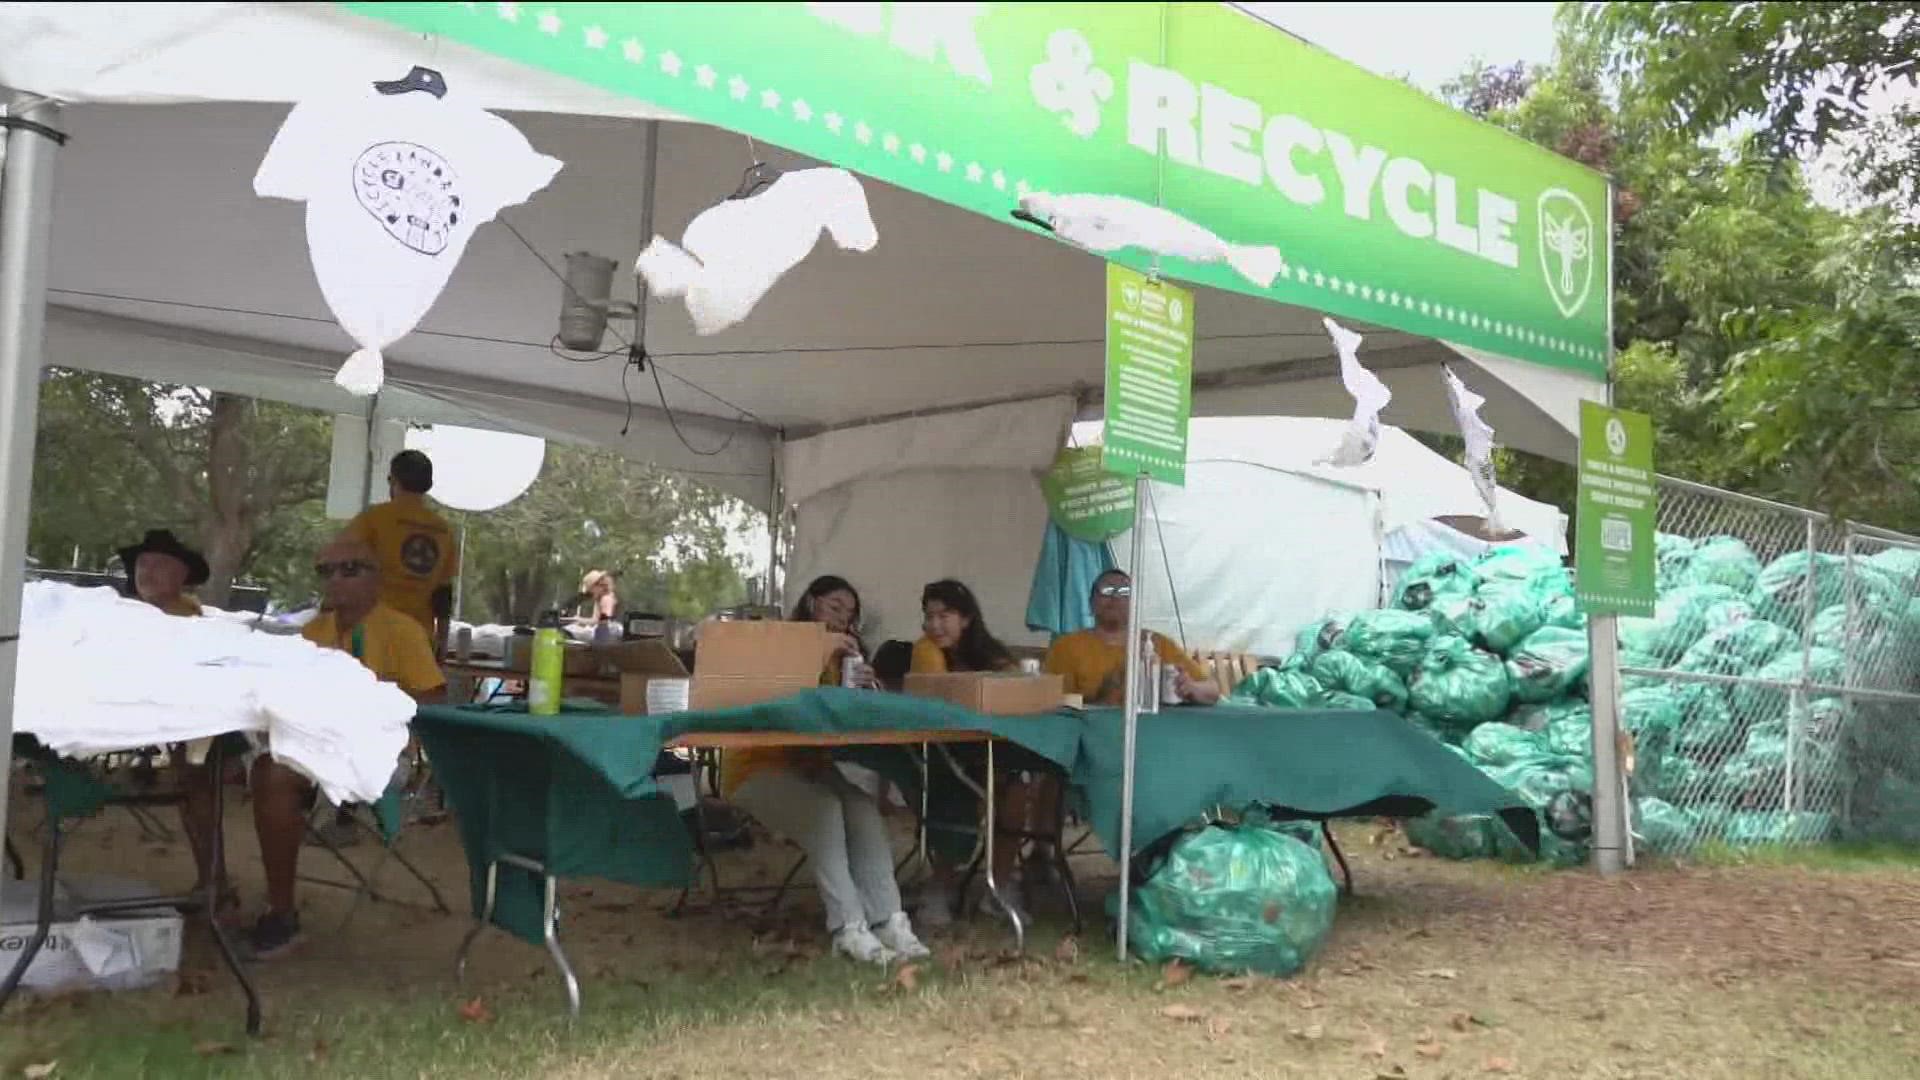 The rock and recycle program at ACL helps make sure cans get picked up to keep Zilker Park clean. Attendees can trade in a full green recycle bag for a T-shirt.